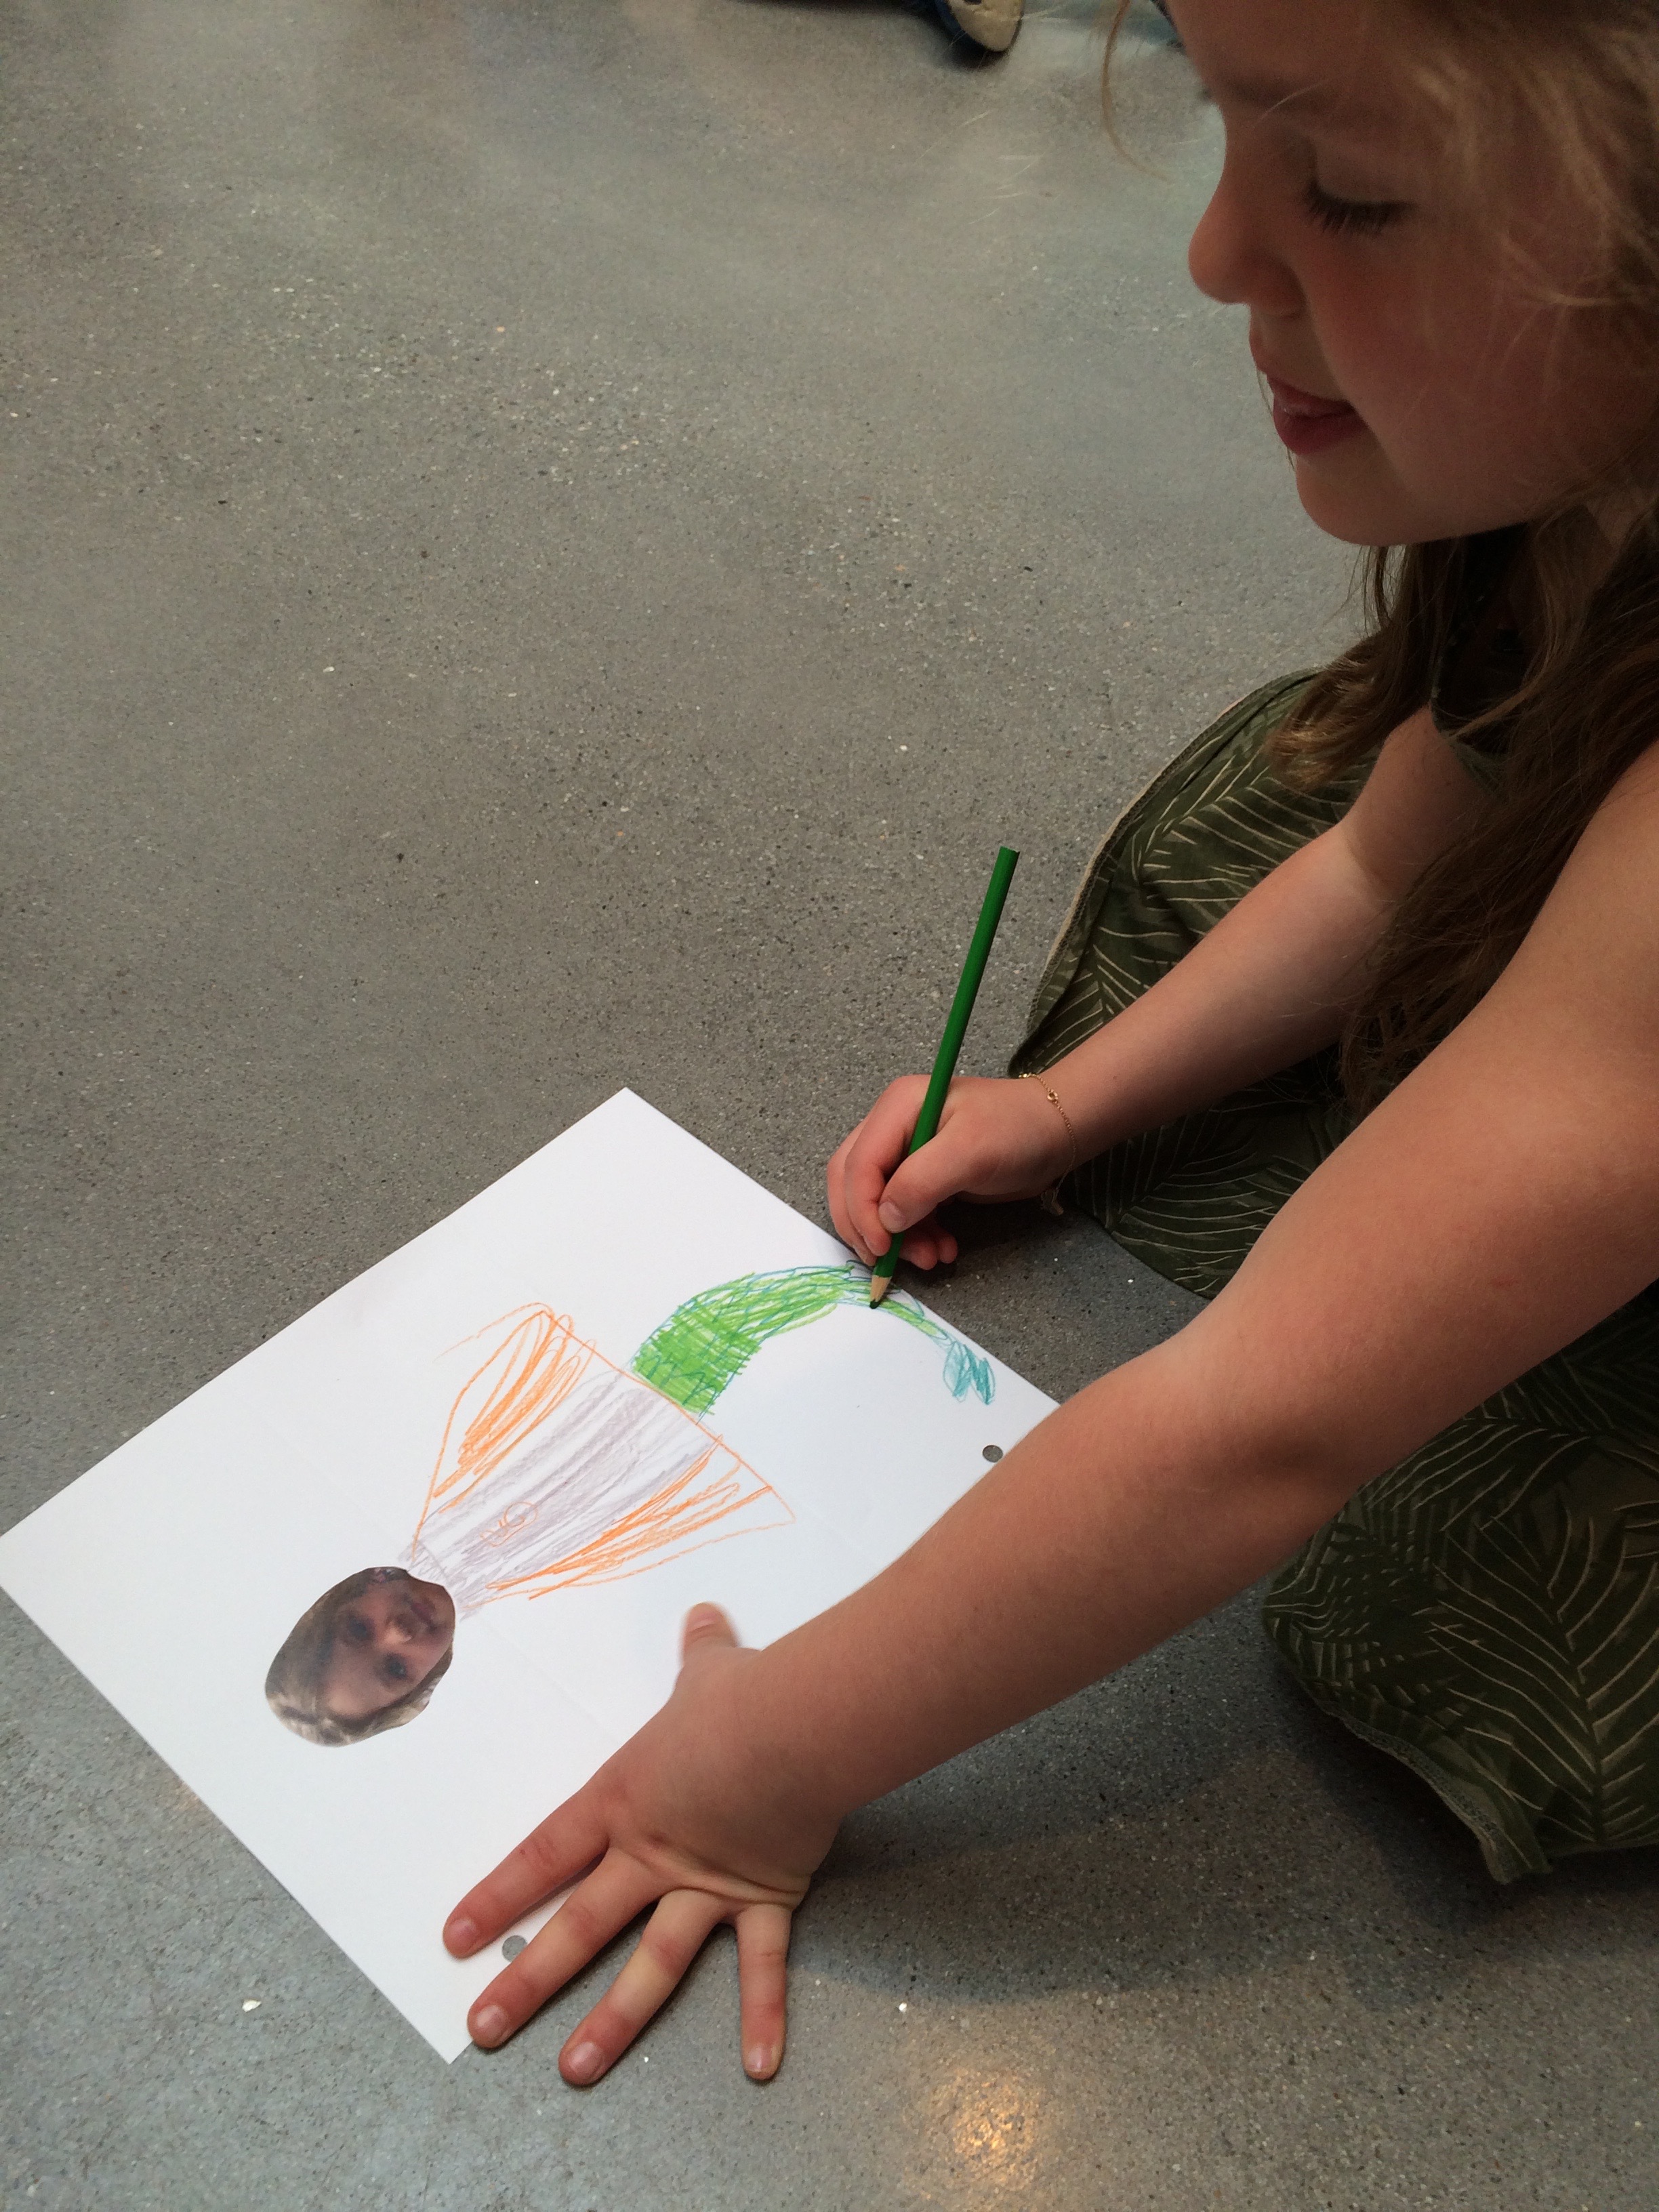 Student workshop inspired by Rob Pruitt's "Exquisite Self Portraits"